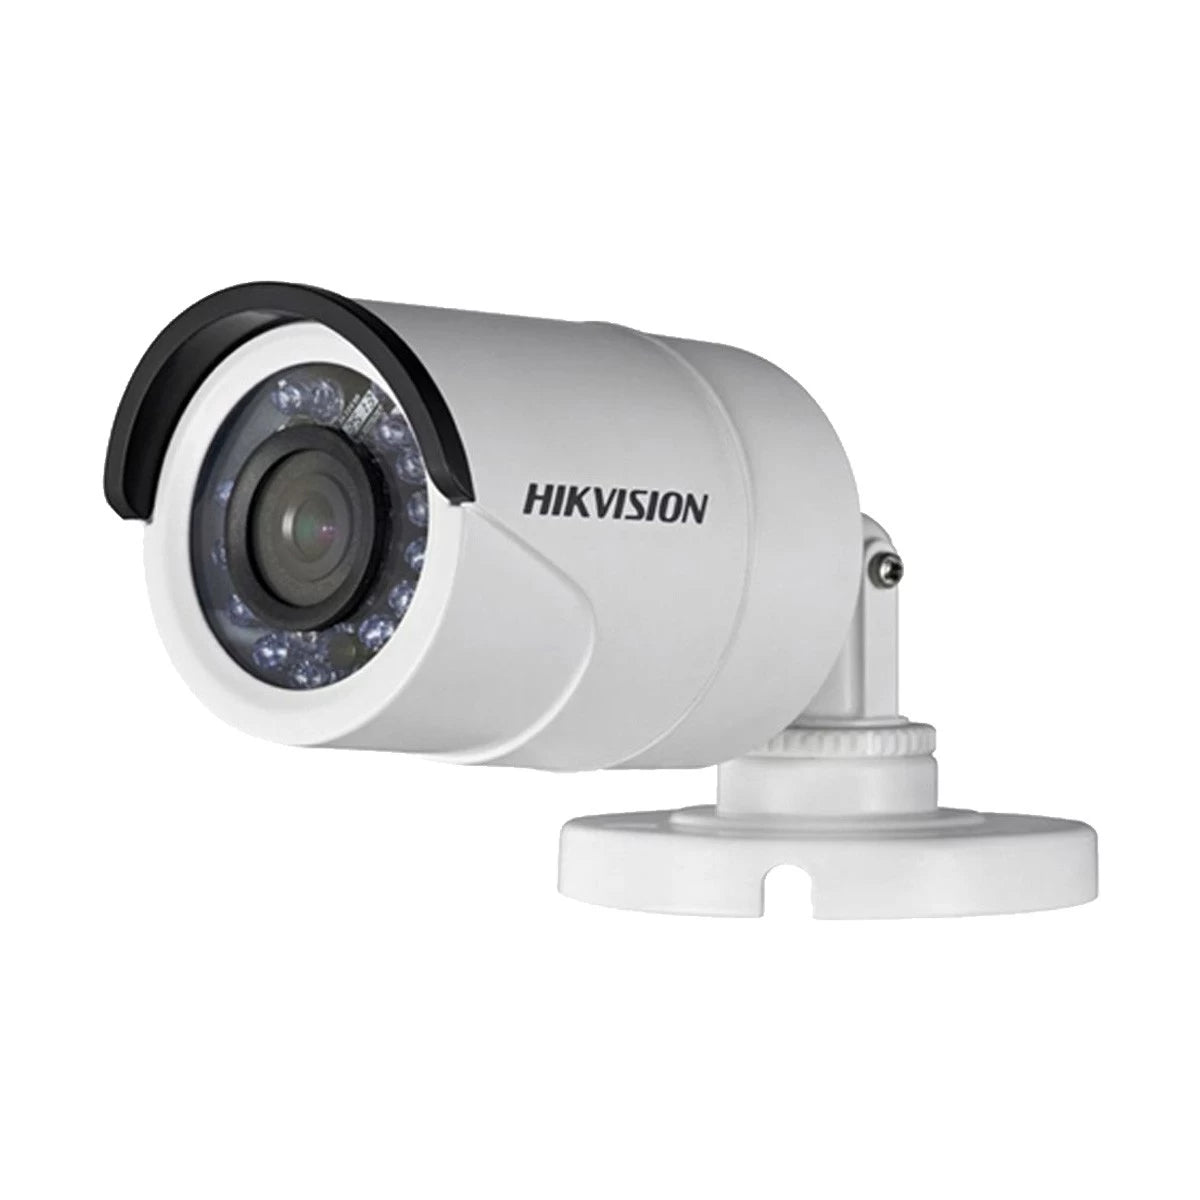 Hikvision 1080p/2MP Weatherproof IR 4-in-1 HD Mini-Bullet Camera DS-2CE16D0T-IRF 2.8mm can be used in video surveillance systems based on various types of DVRs-DS-2CE16DOT-IRF